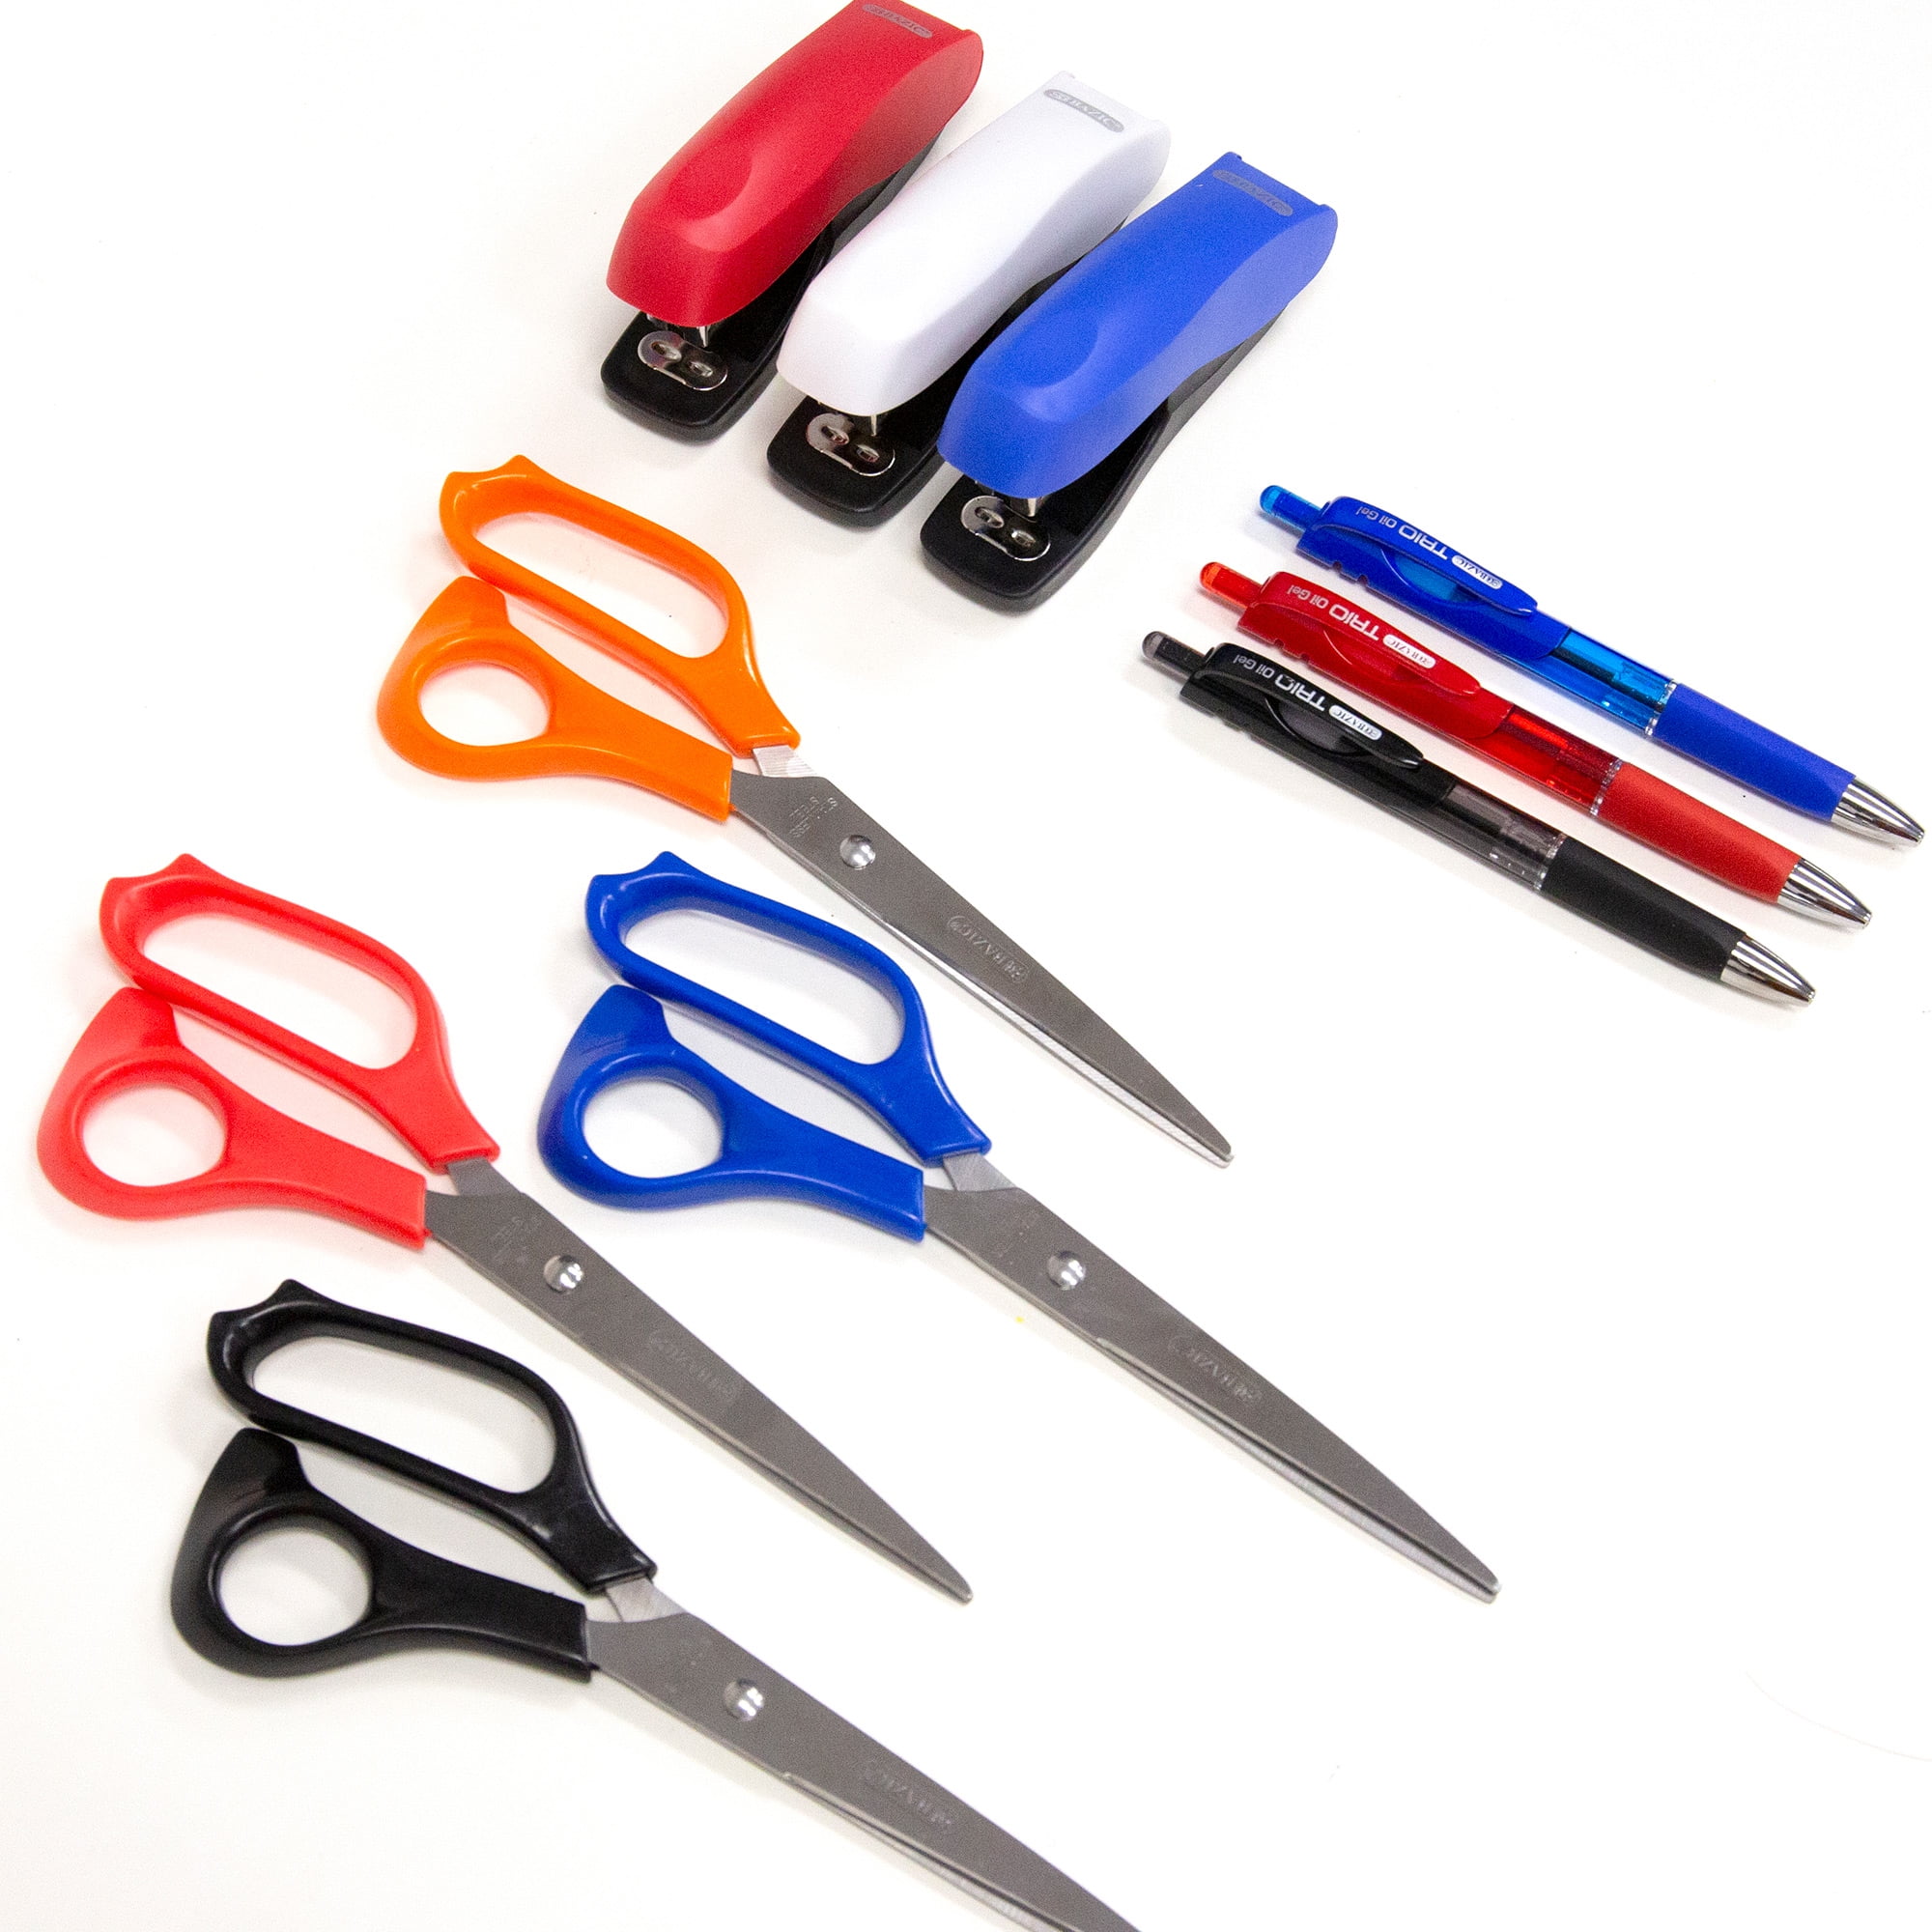 Bazic Products Bazic 8 Kitchen Stainless Steel Scissors / Box Qty - 24